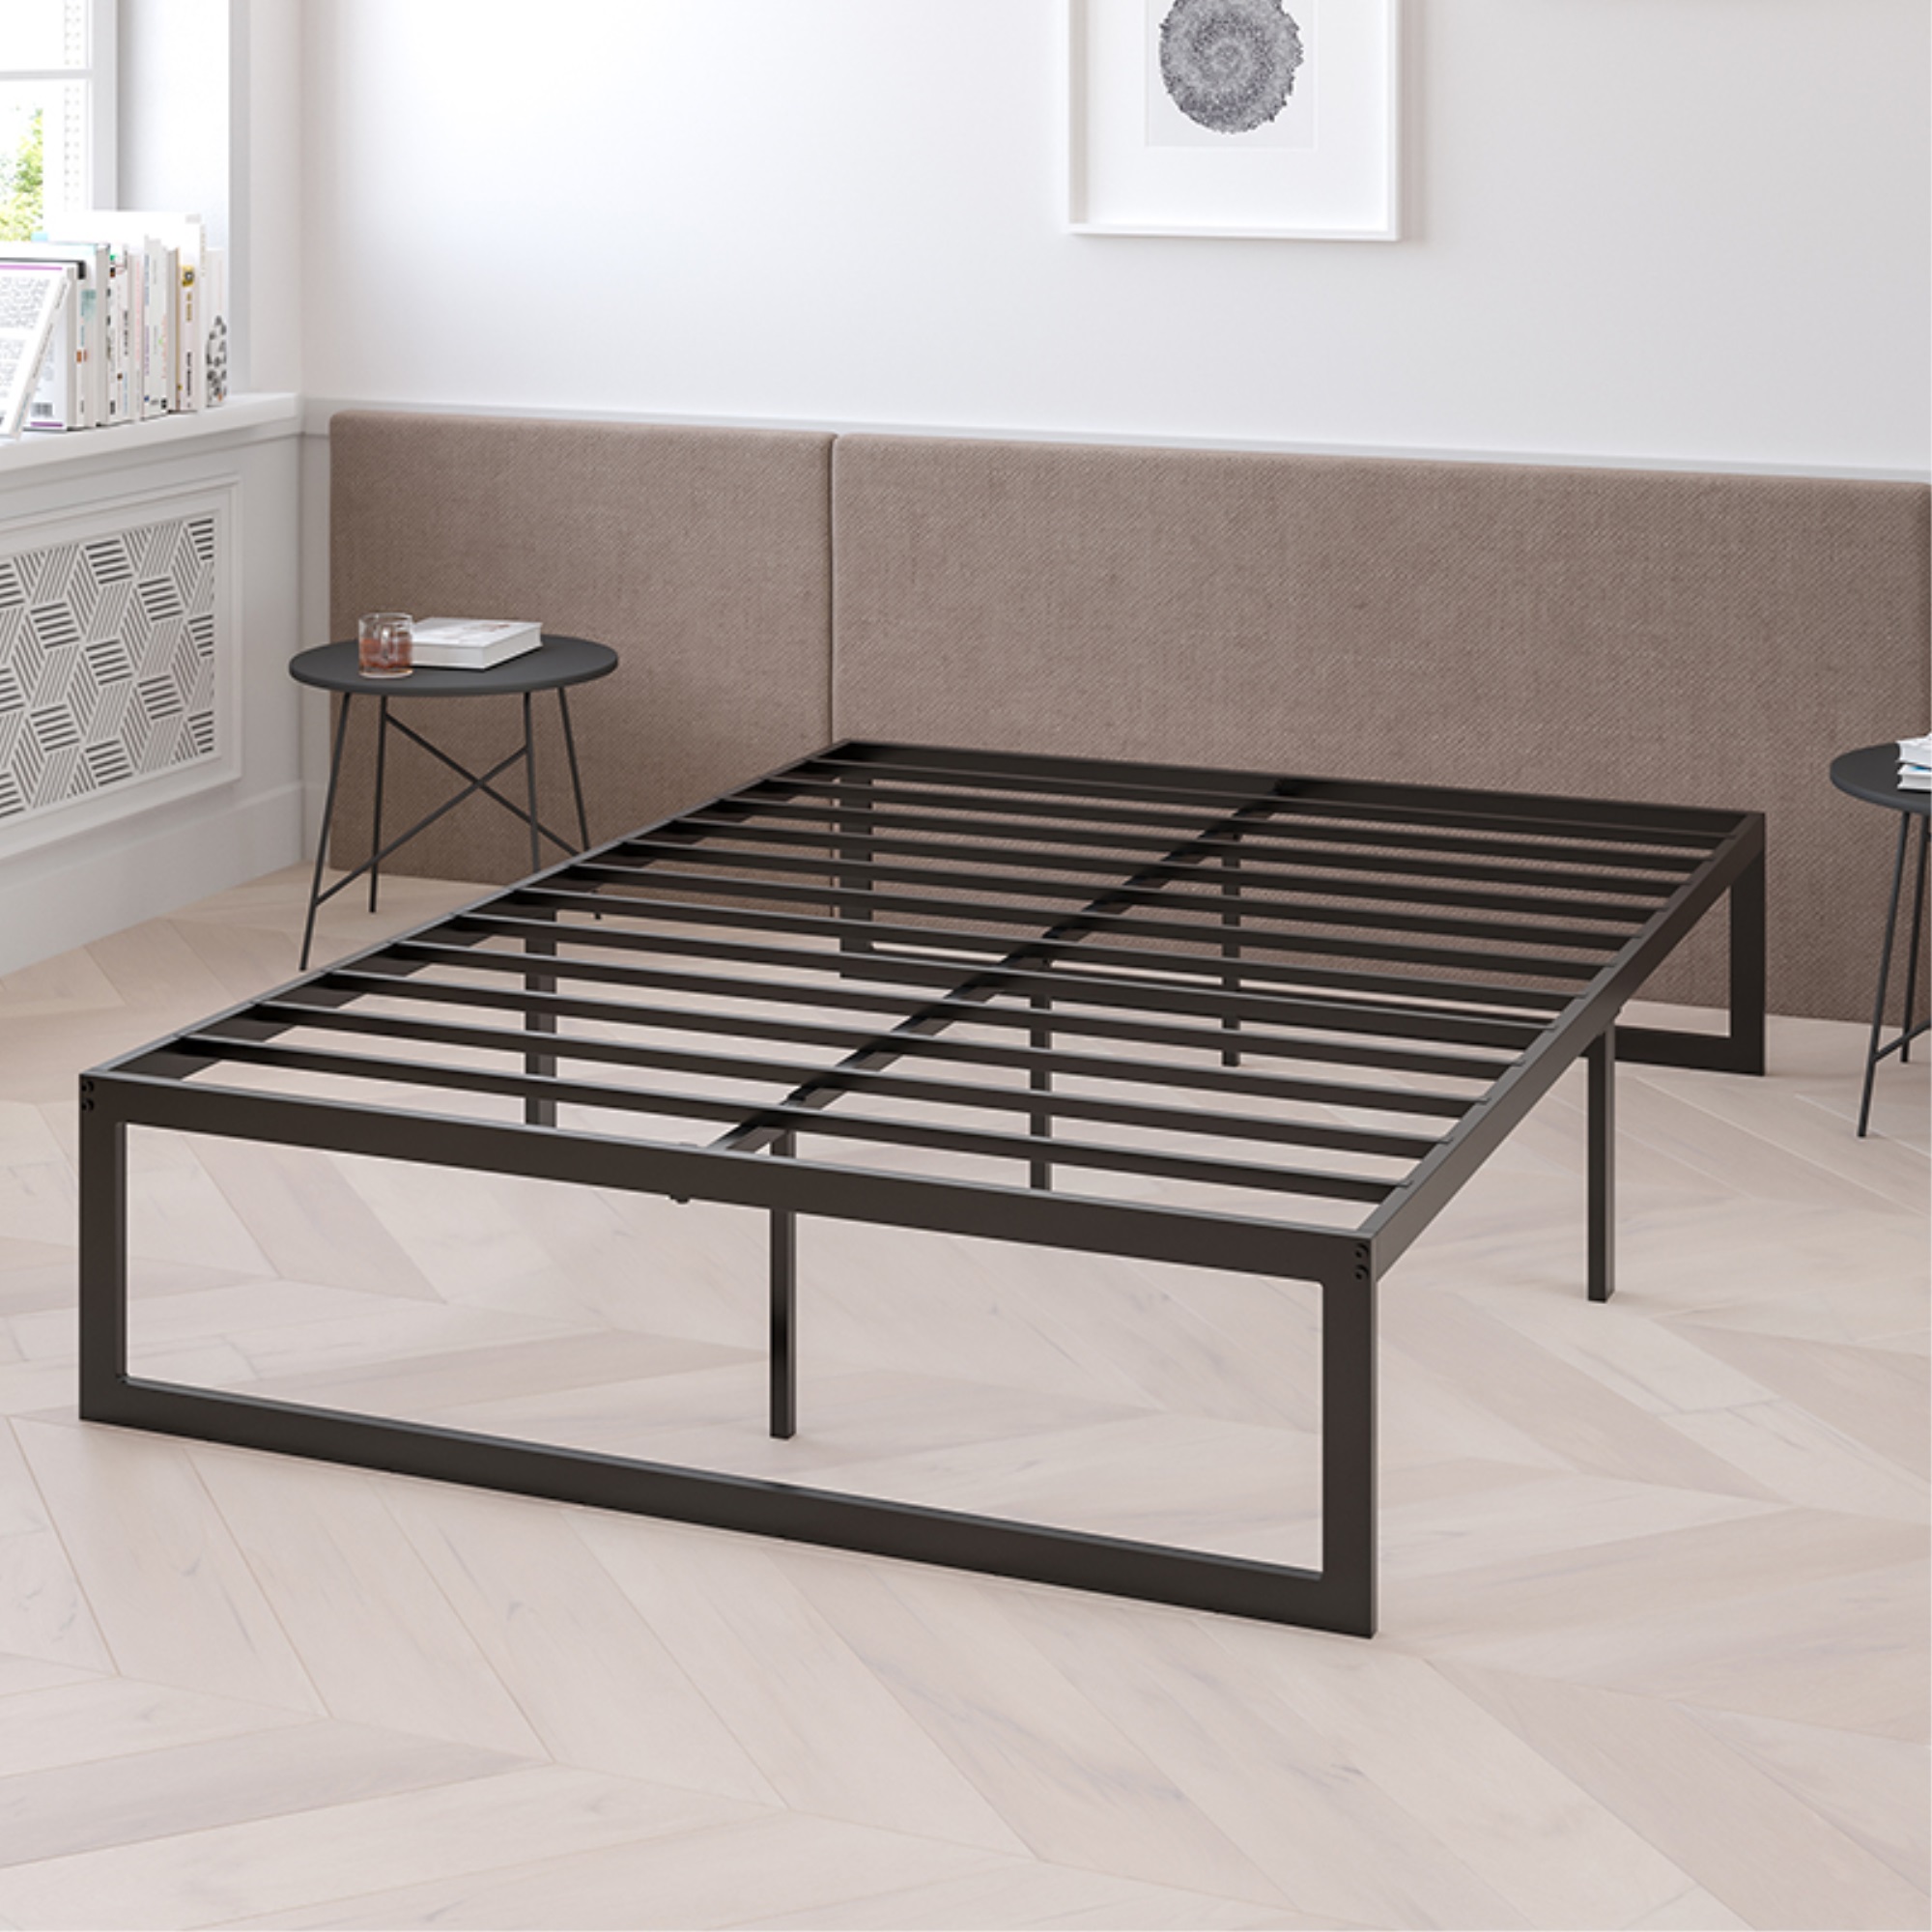 Flash Furniture 14 Inch Metal Platform Bed Frame - No Box Spring Needed with Steel Slat Support and Quick Lock Functionality (King)